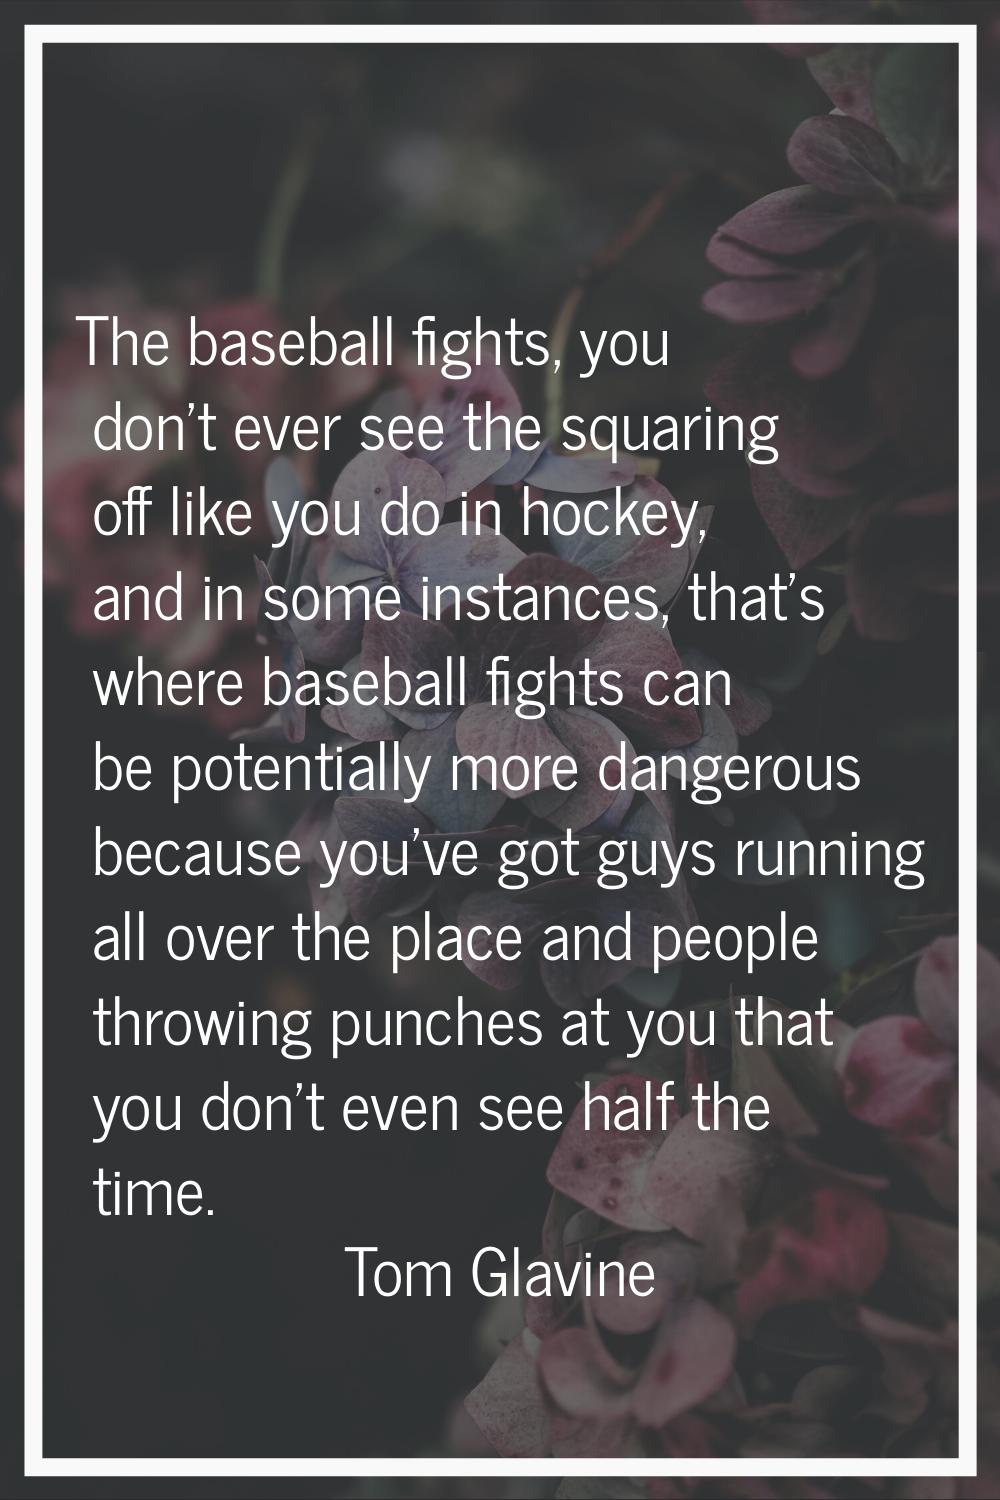 The baseball fights, you don't ever see the squaring off like you do in hockey, and in some instanc